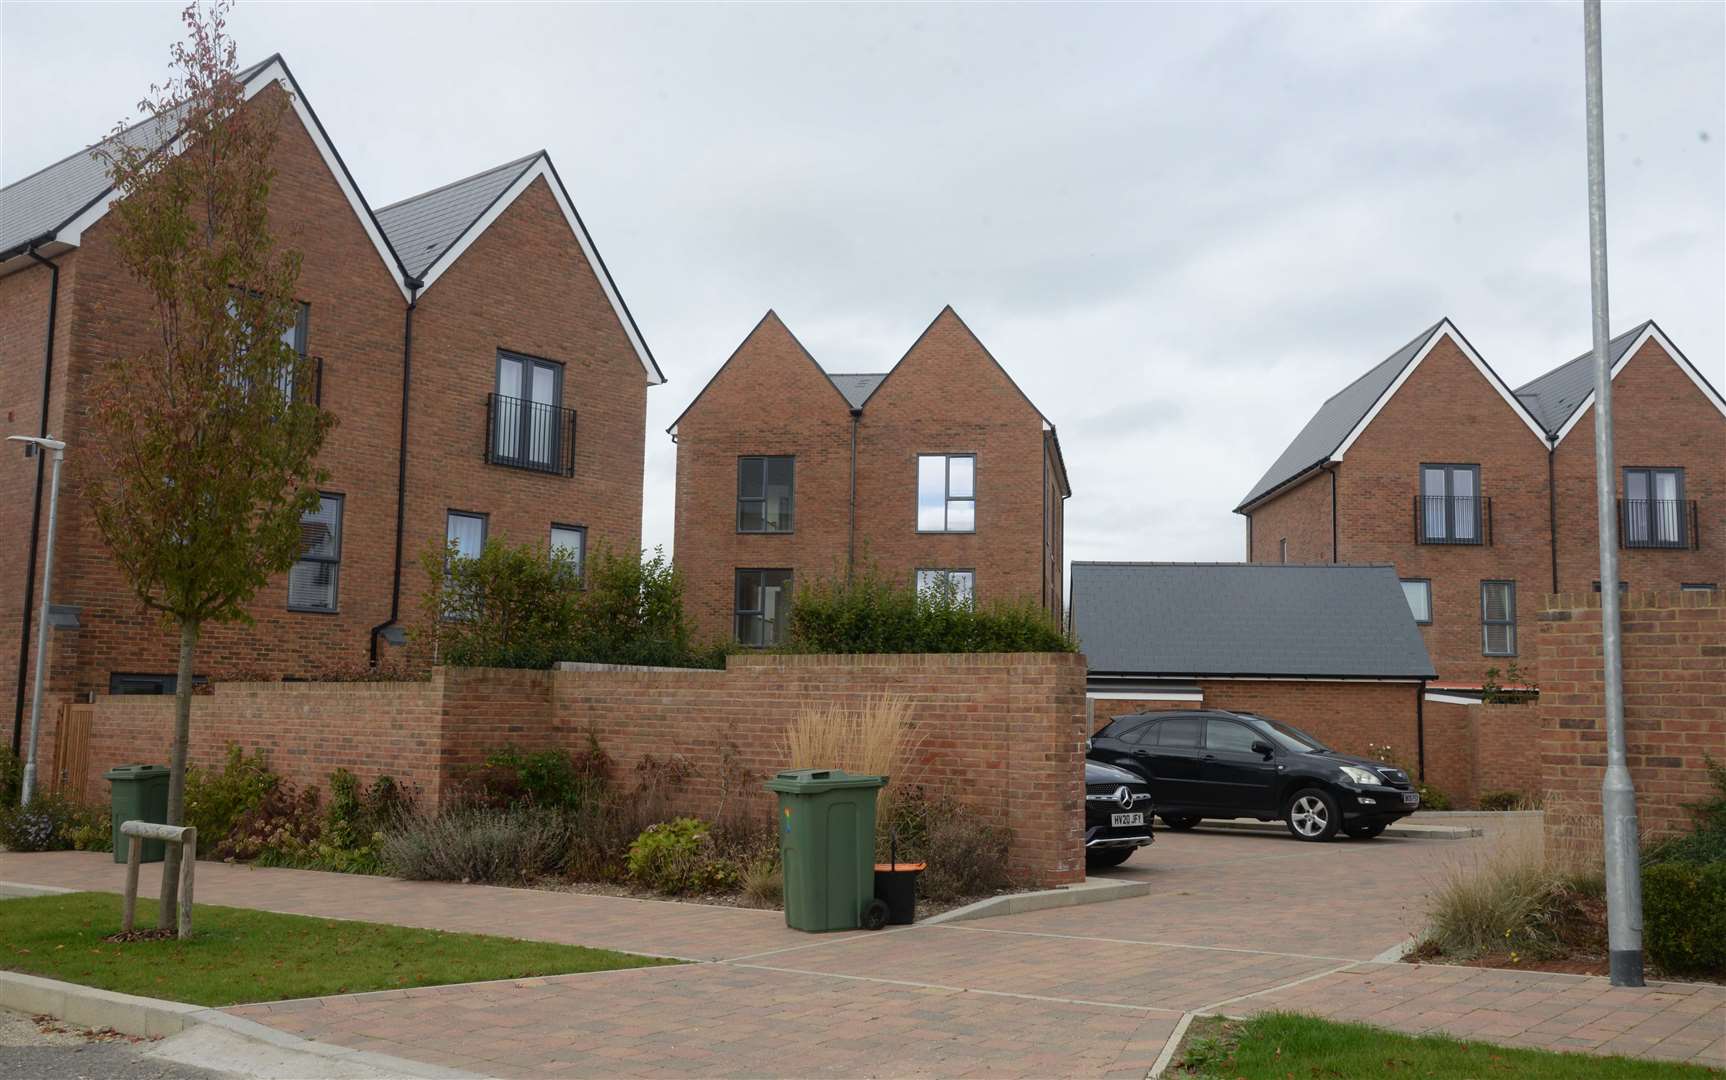 The Chilmington Green housing estate will feature 5,750 homes when complete. Picture: Chris Davey